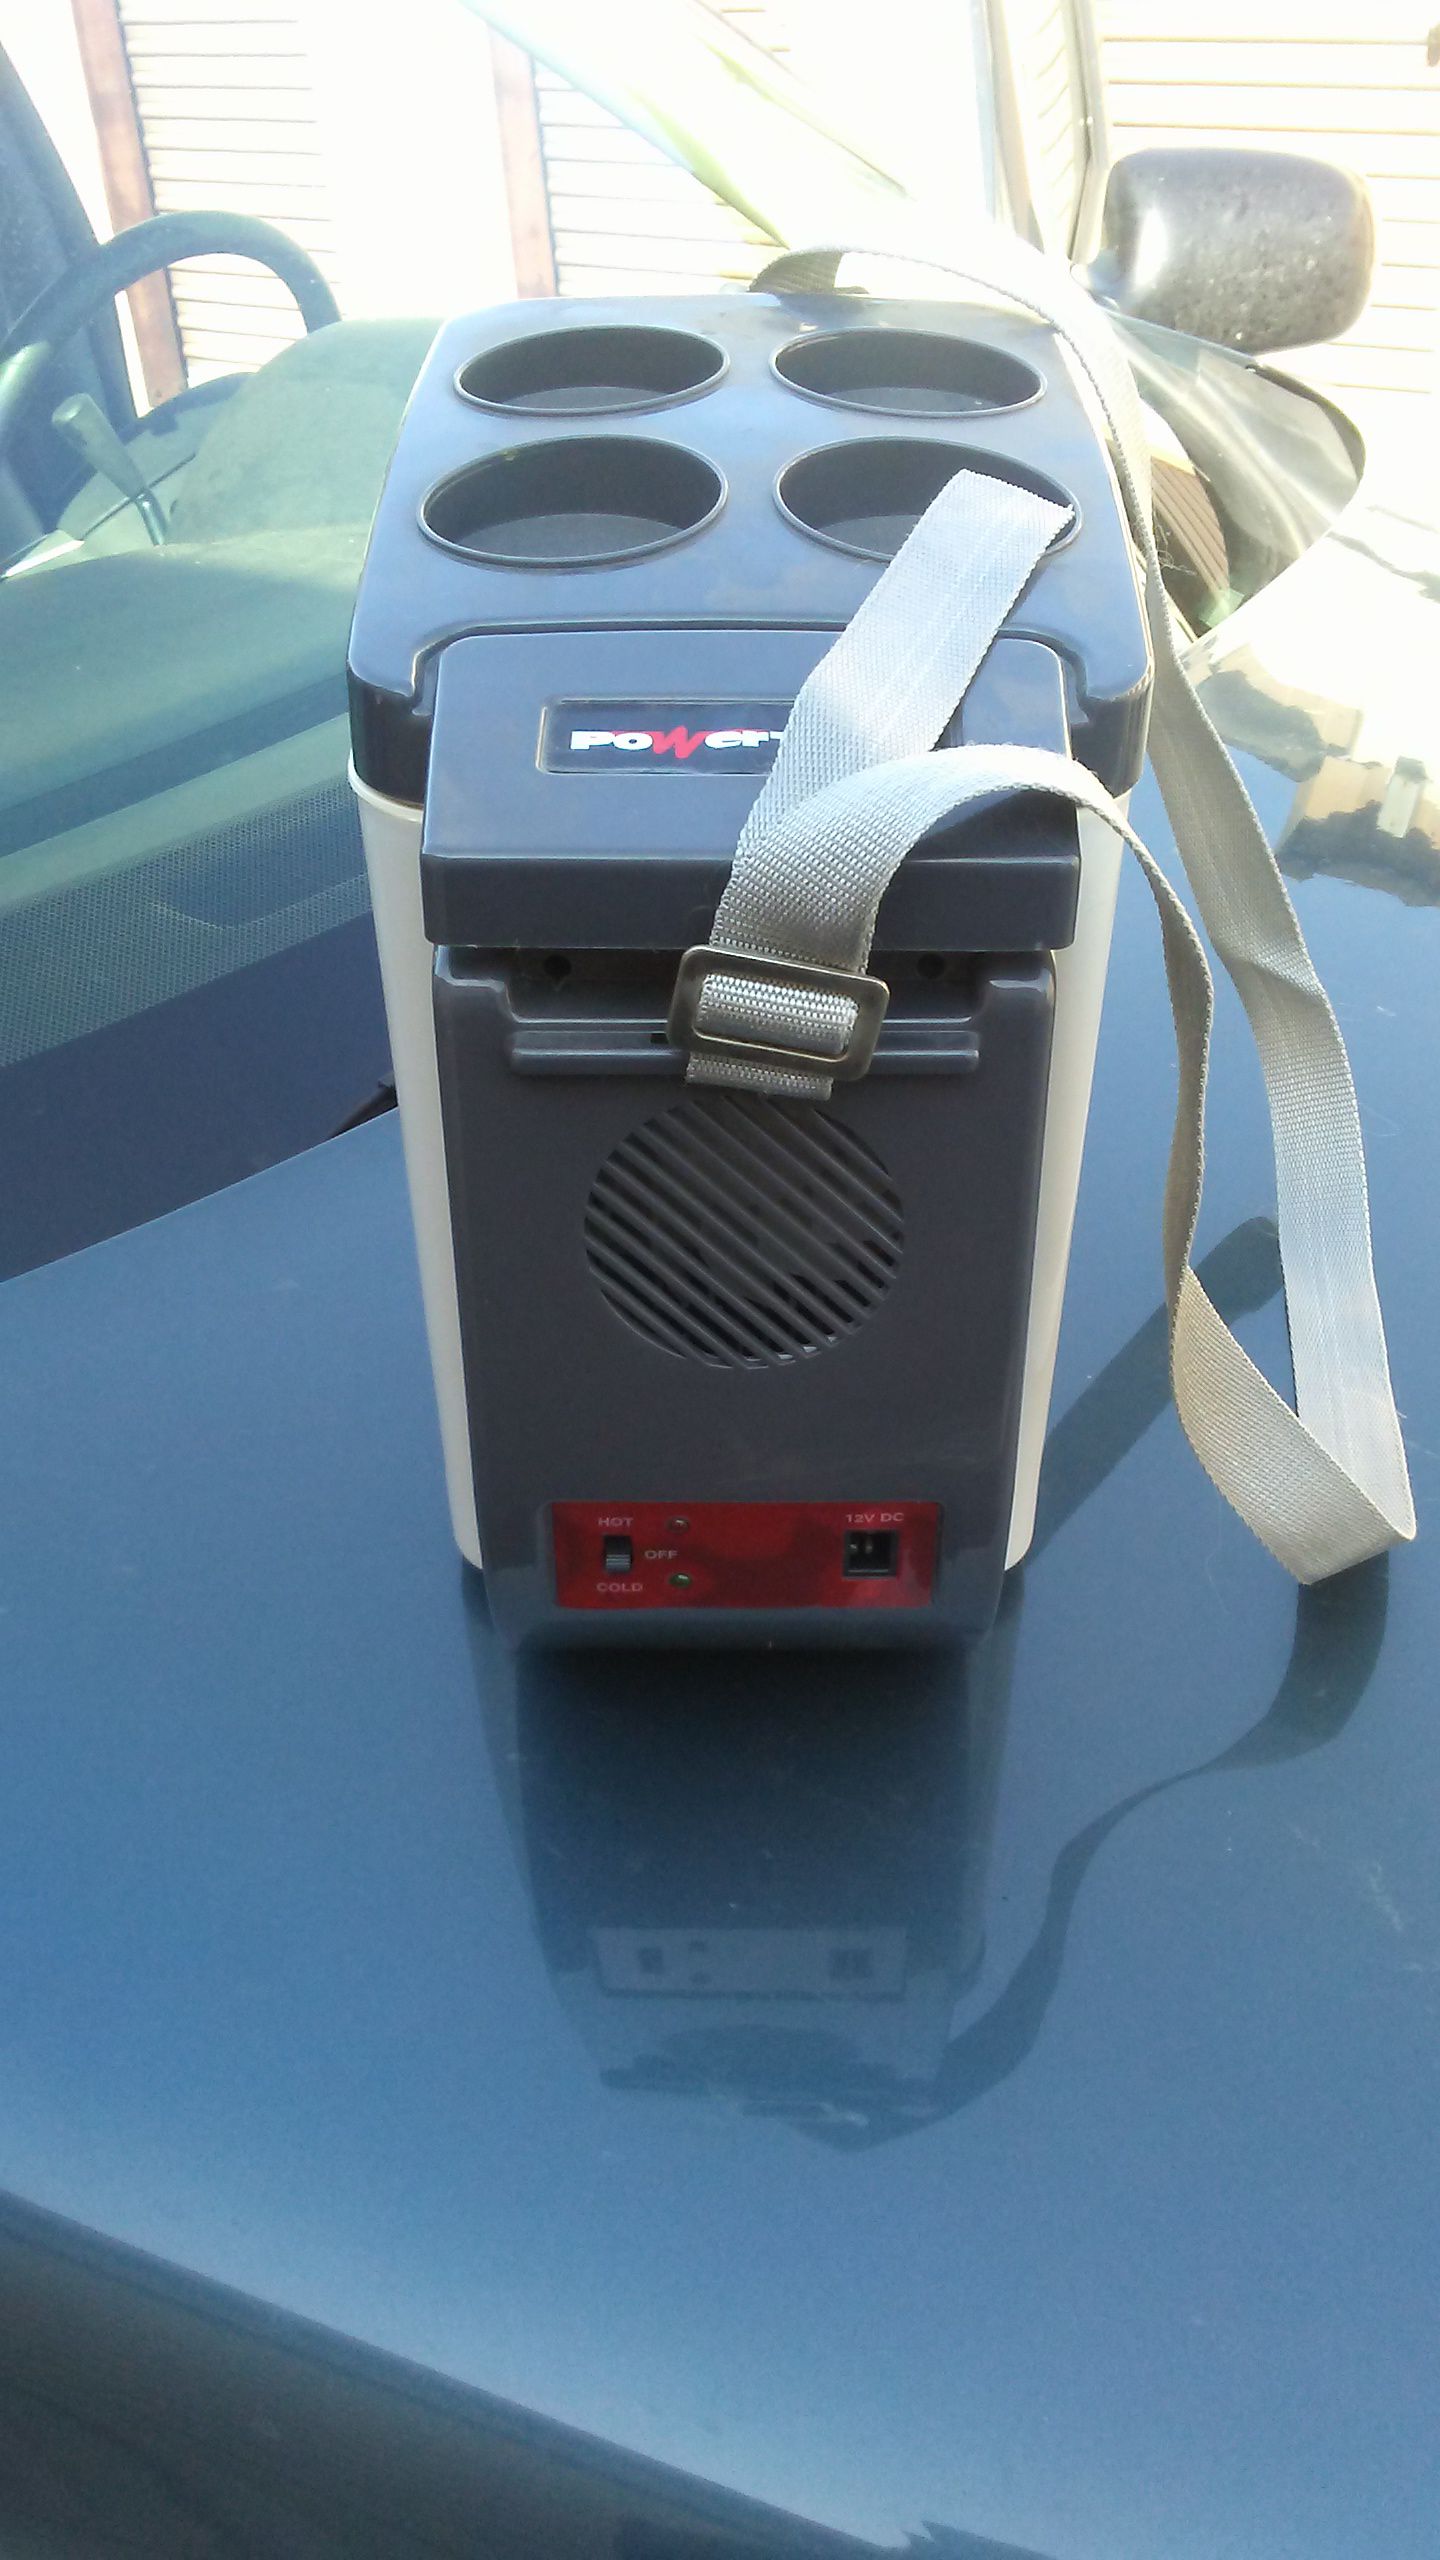 Portable Heater and Fan just plug into your car